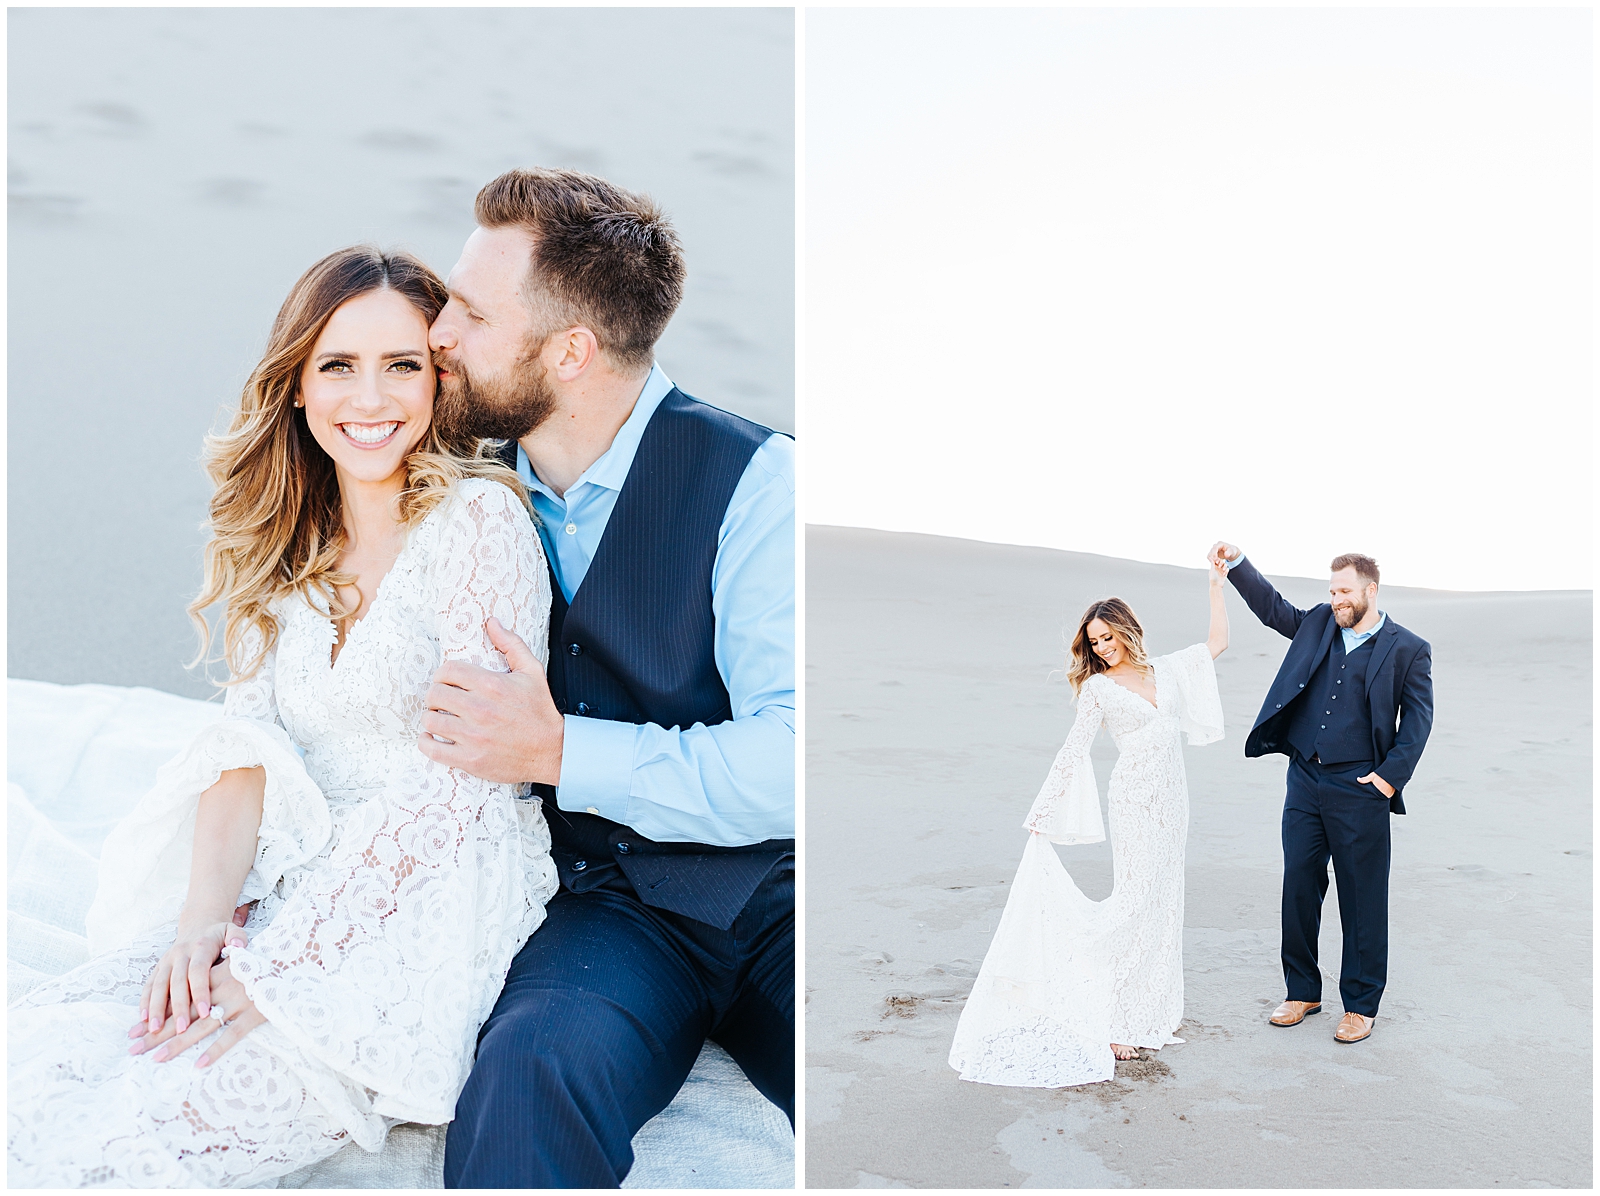 Romantic Sand Dunes Engagement Photos in White dress and Navy suit